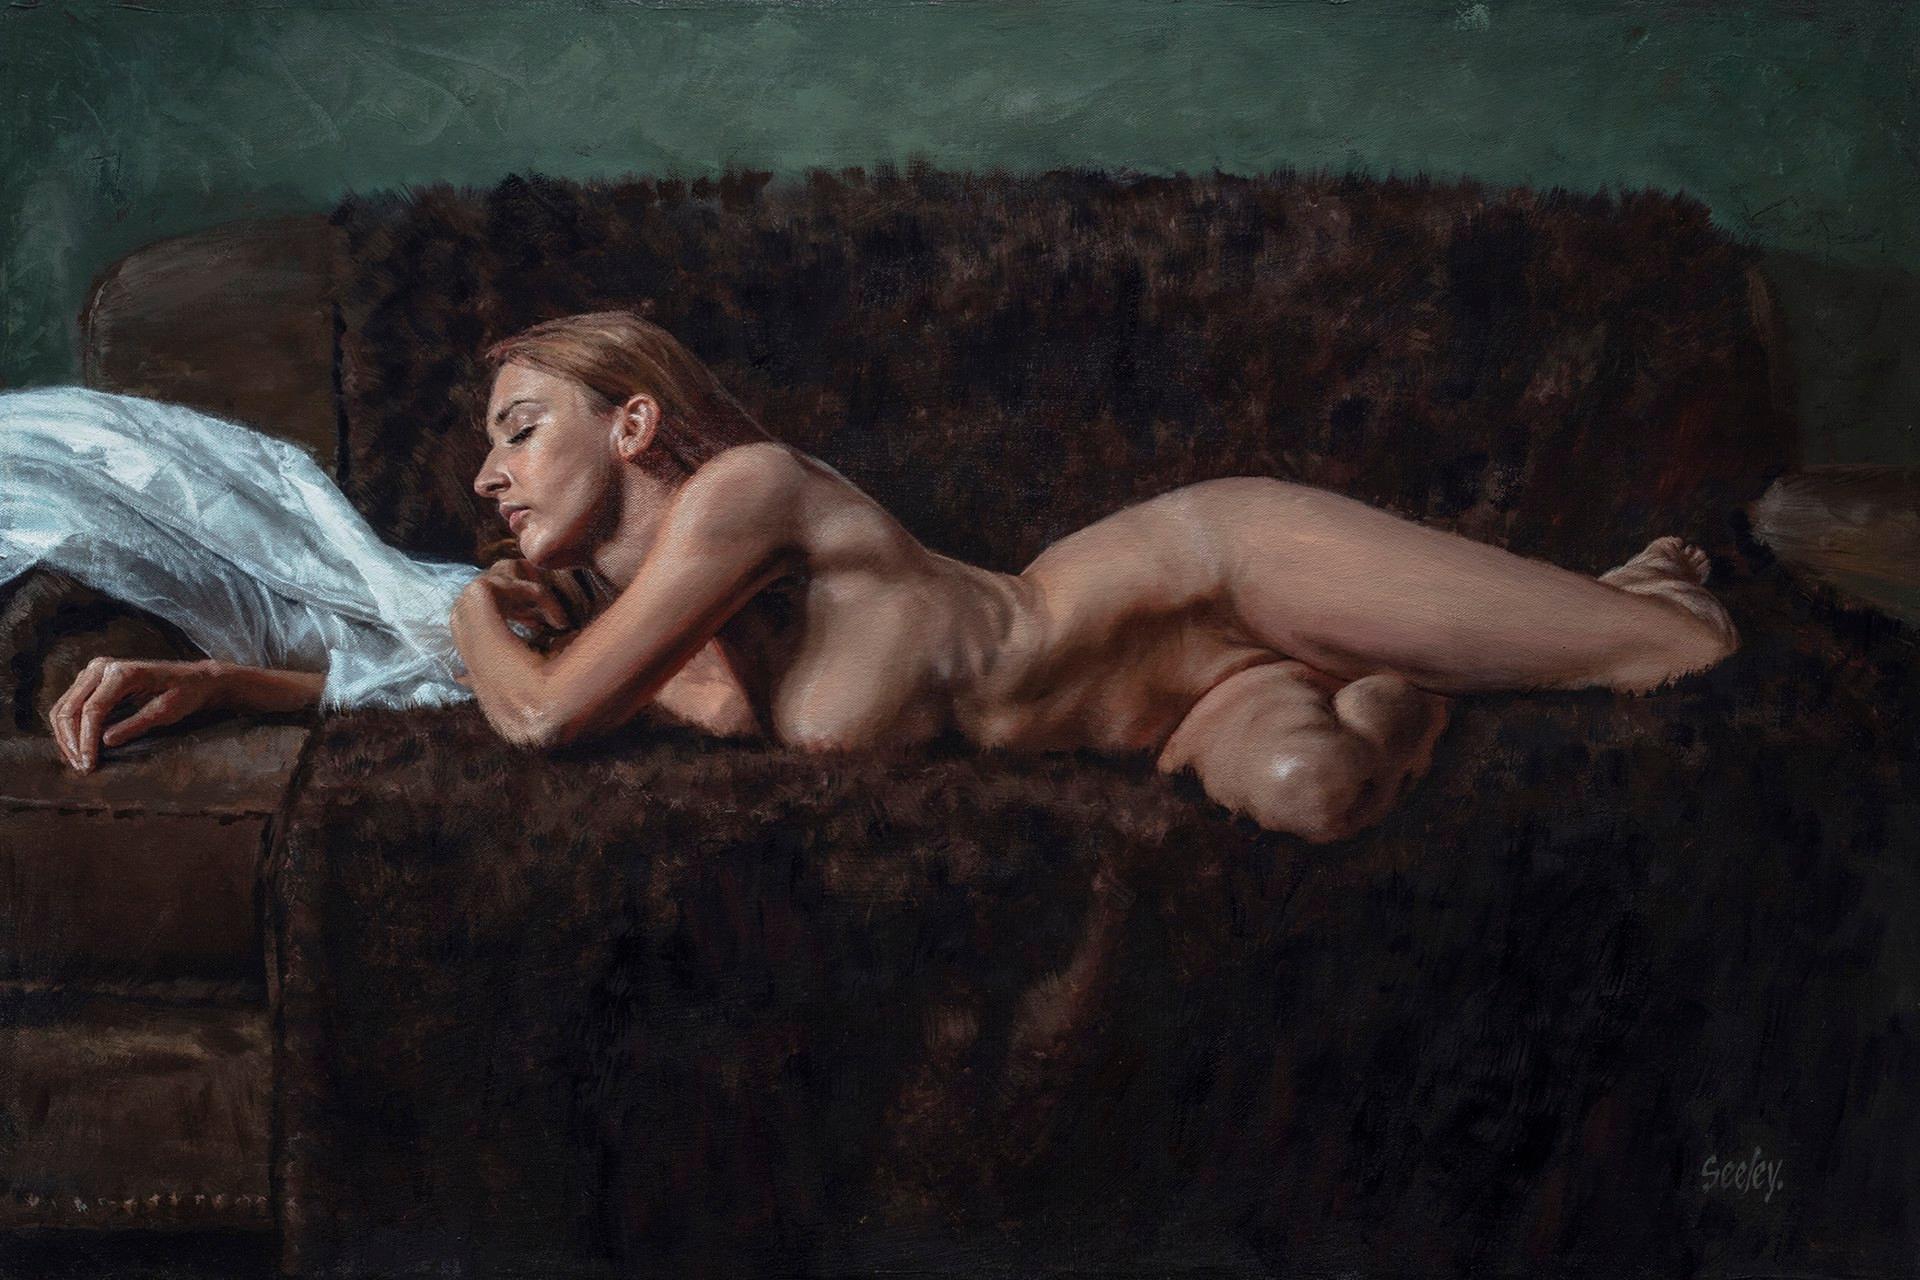 Dave Seeley Nude Painting - Erica #1